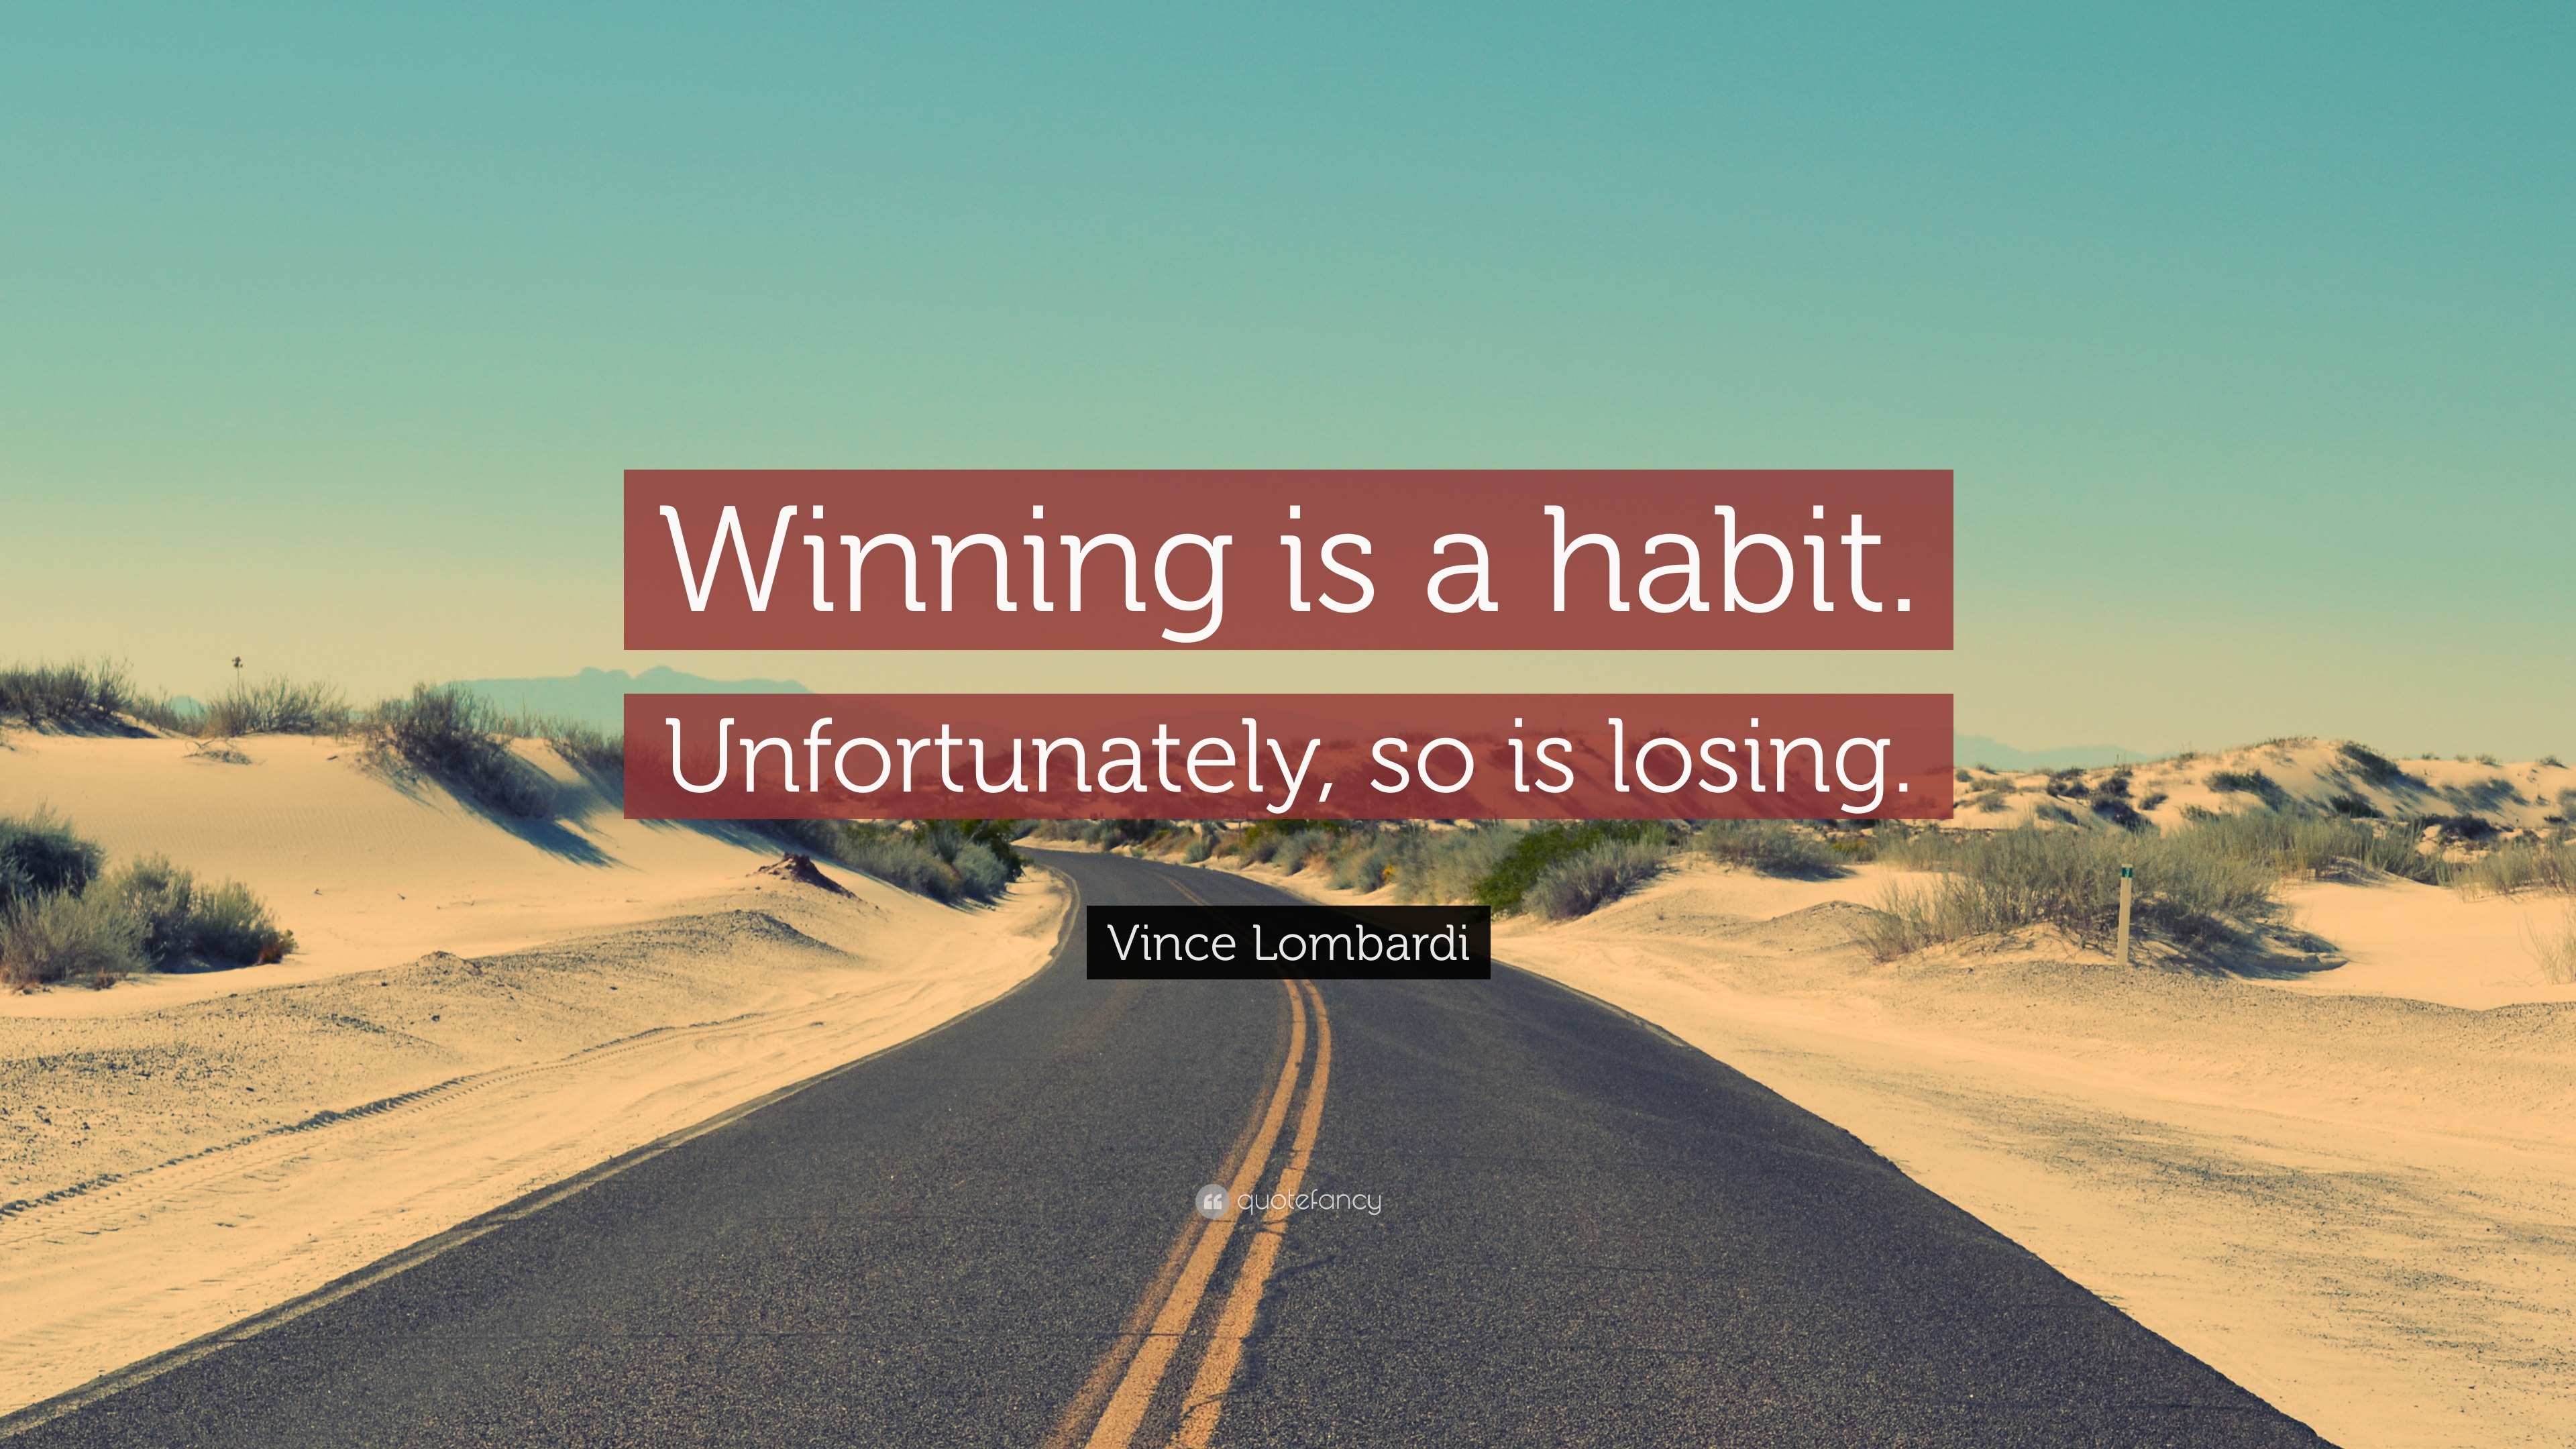 Vince Lombardi Quote: “Winning is a habit. Unfortunately, so is losing.”